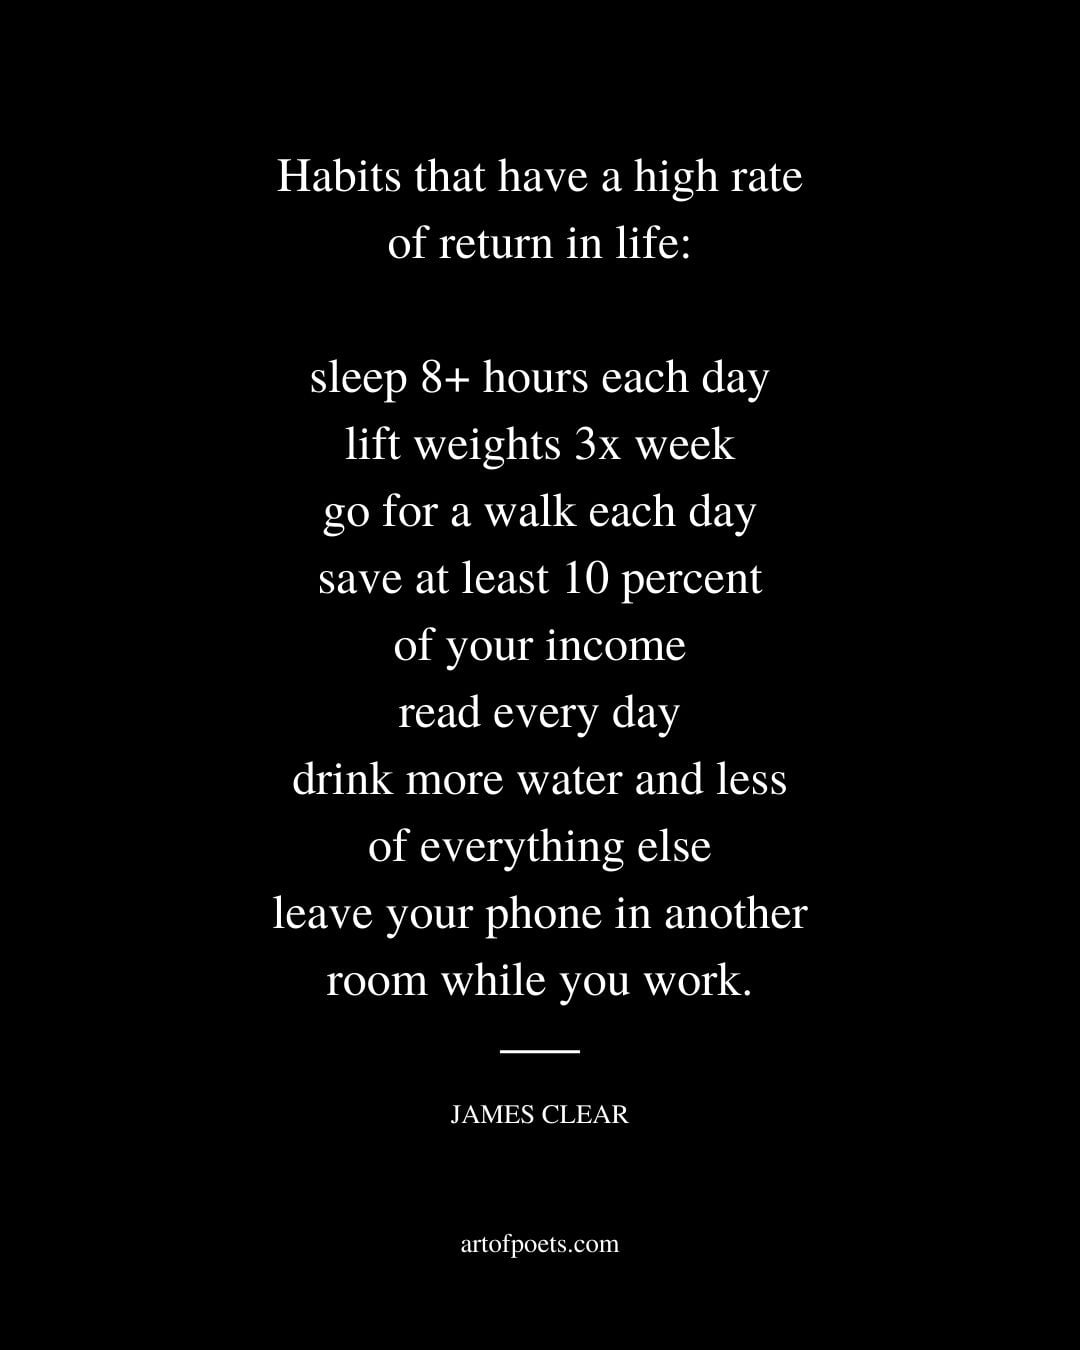 Habits that have a high rate of return in life